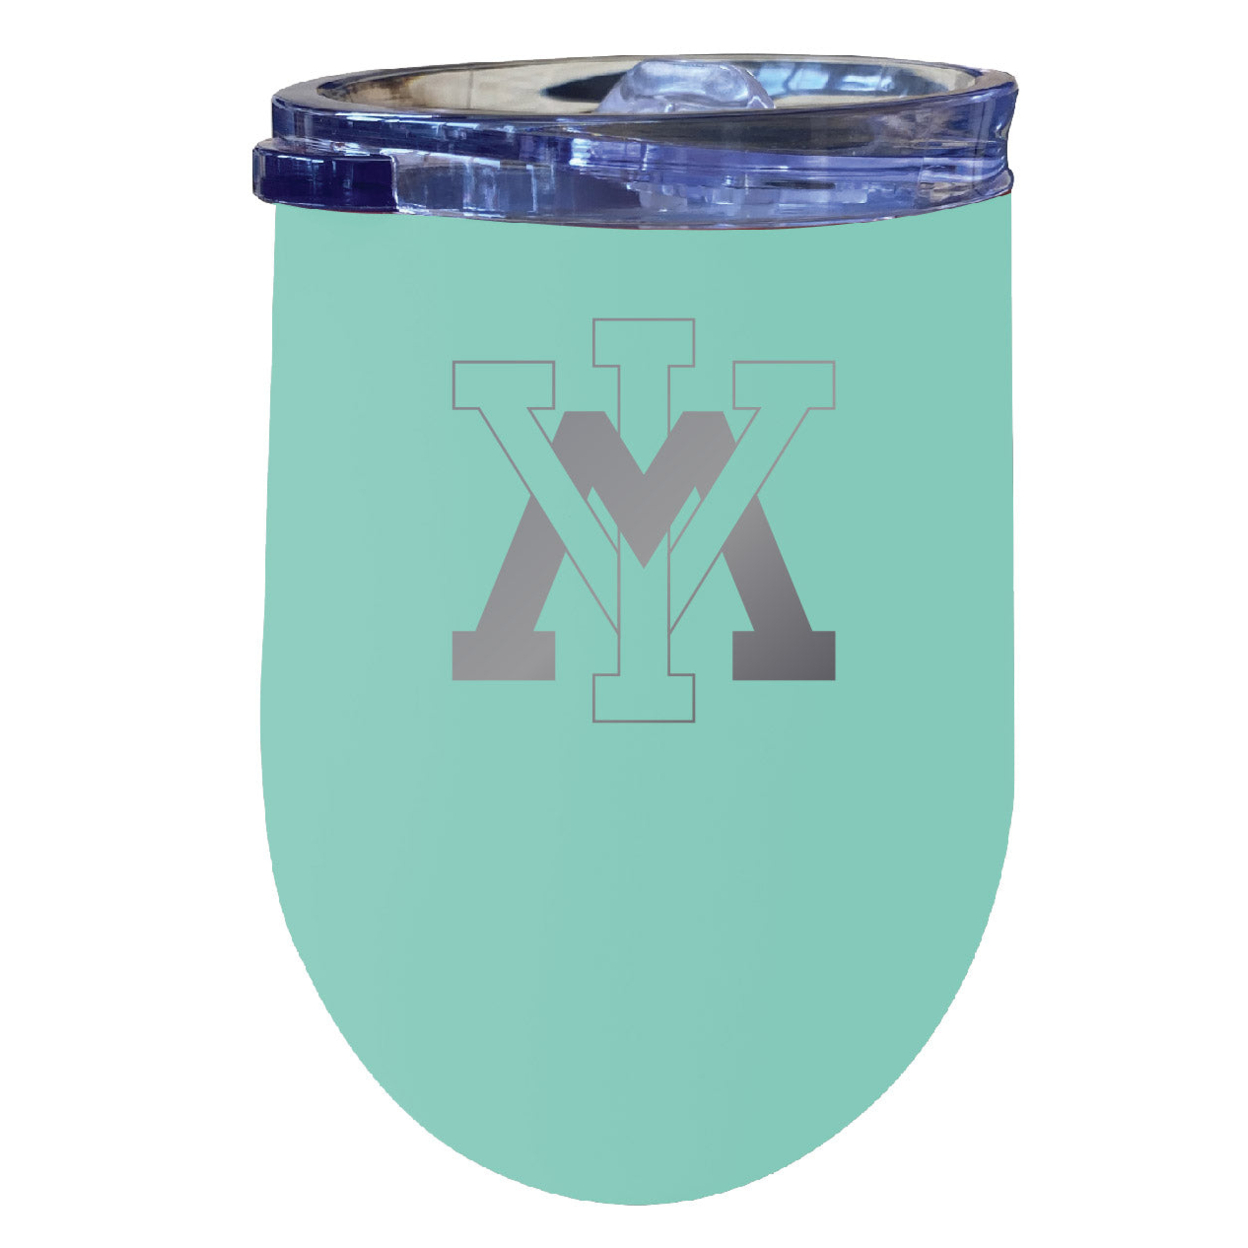 VMI Keydets 12 Oz Etched Insulated Wine Stainless Steel Tumbler - Choose Your Color - Seafoam